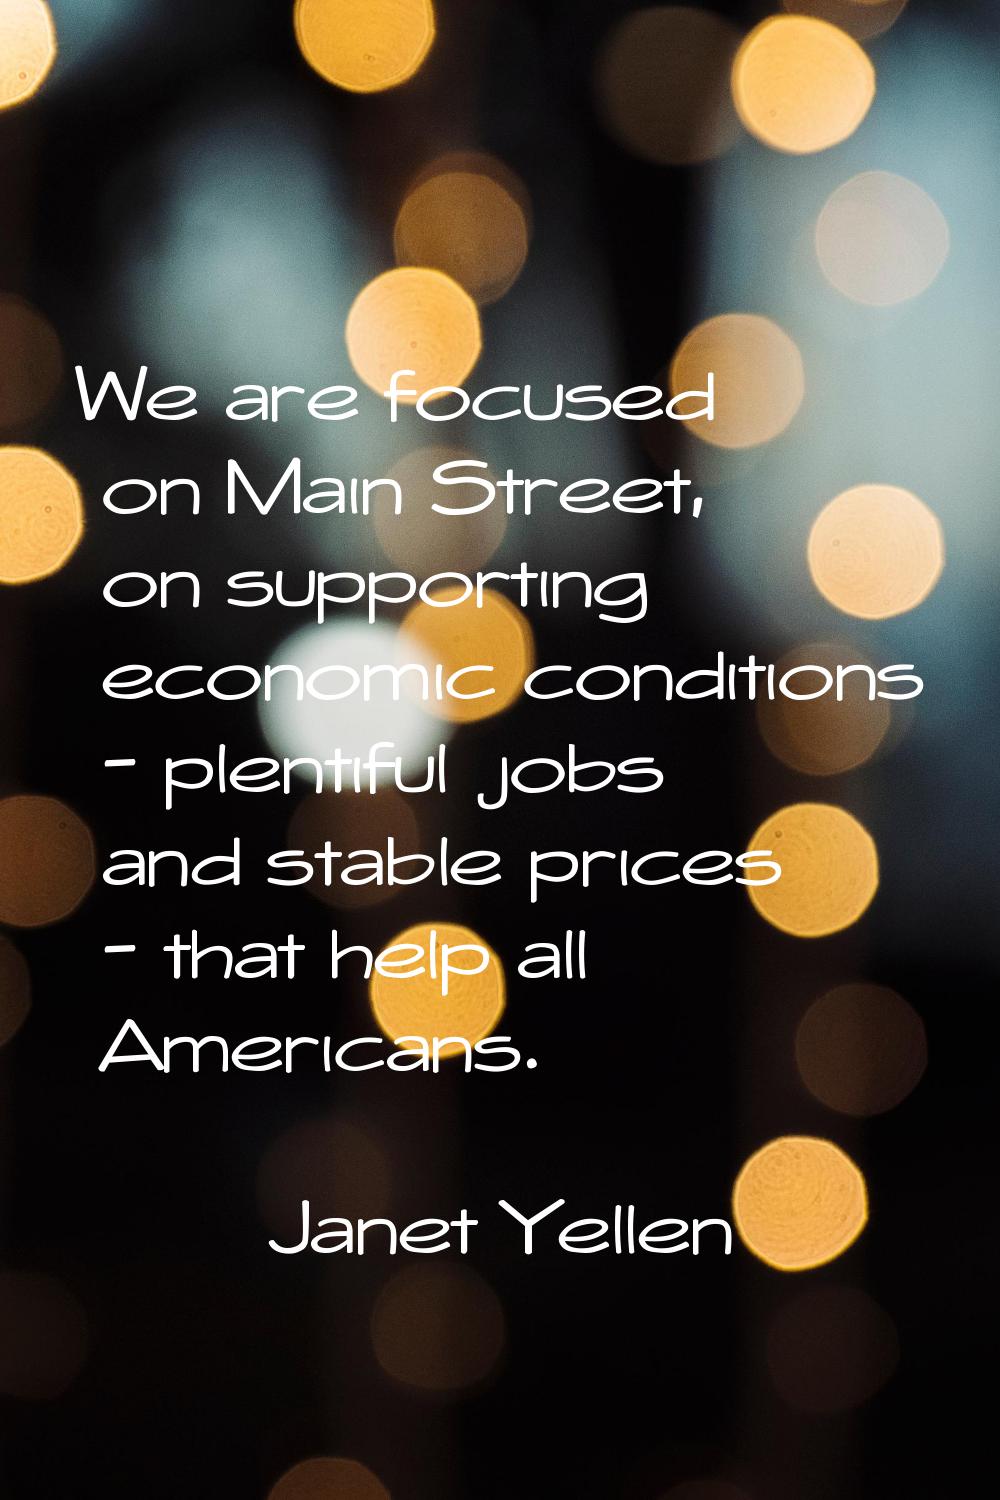 We are focused on Main Street, on supporting economic conditions - plentiful jobs and stable prices